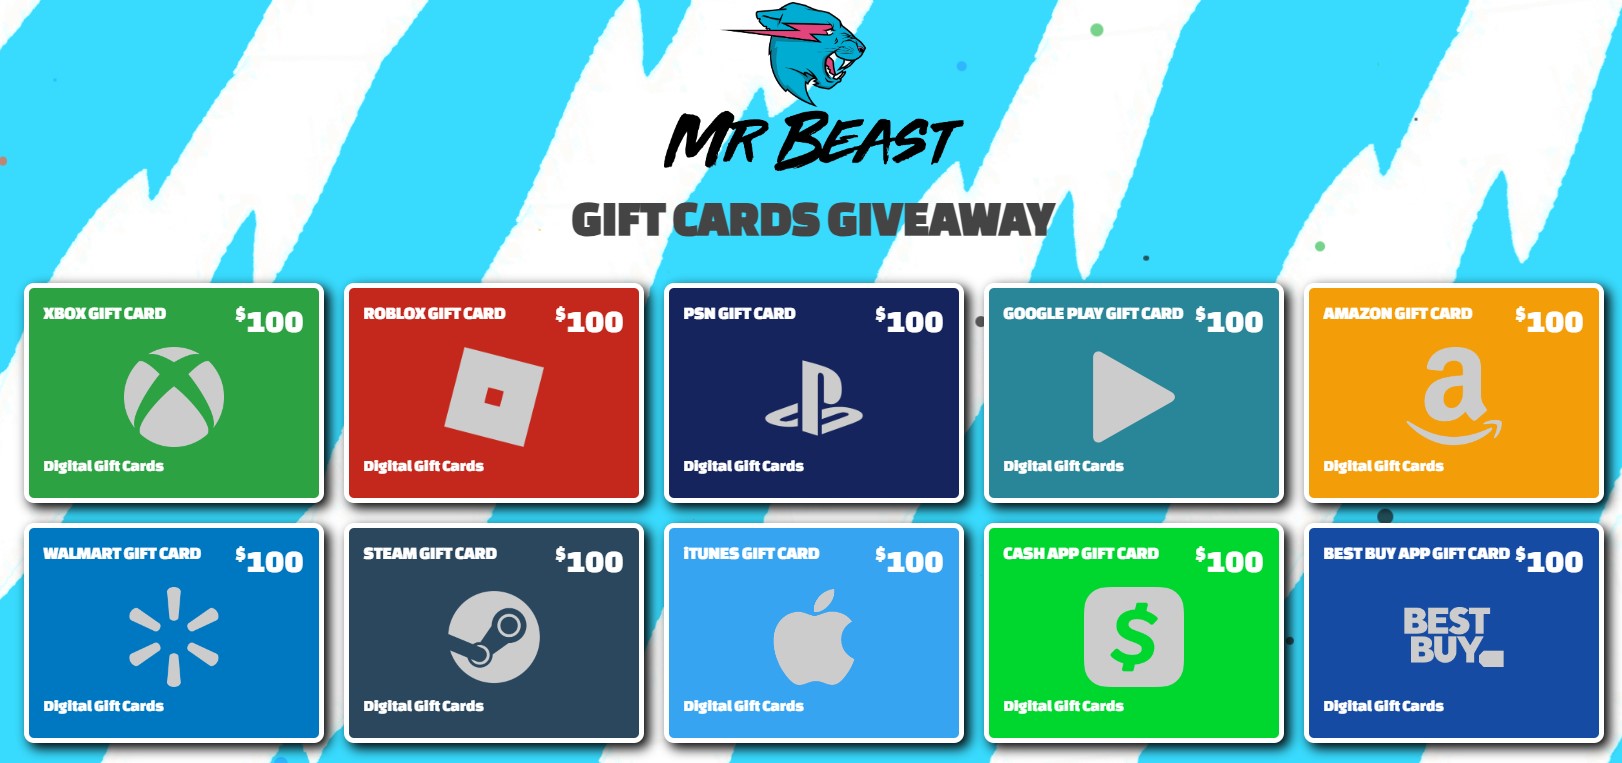 Example "GIFT CARDS GIVEAWAY" - Scam Site